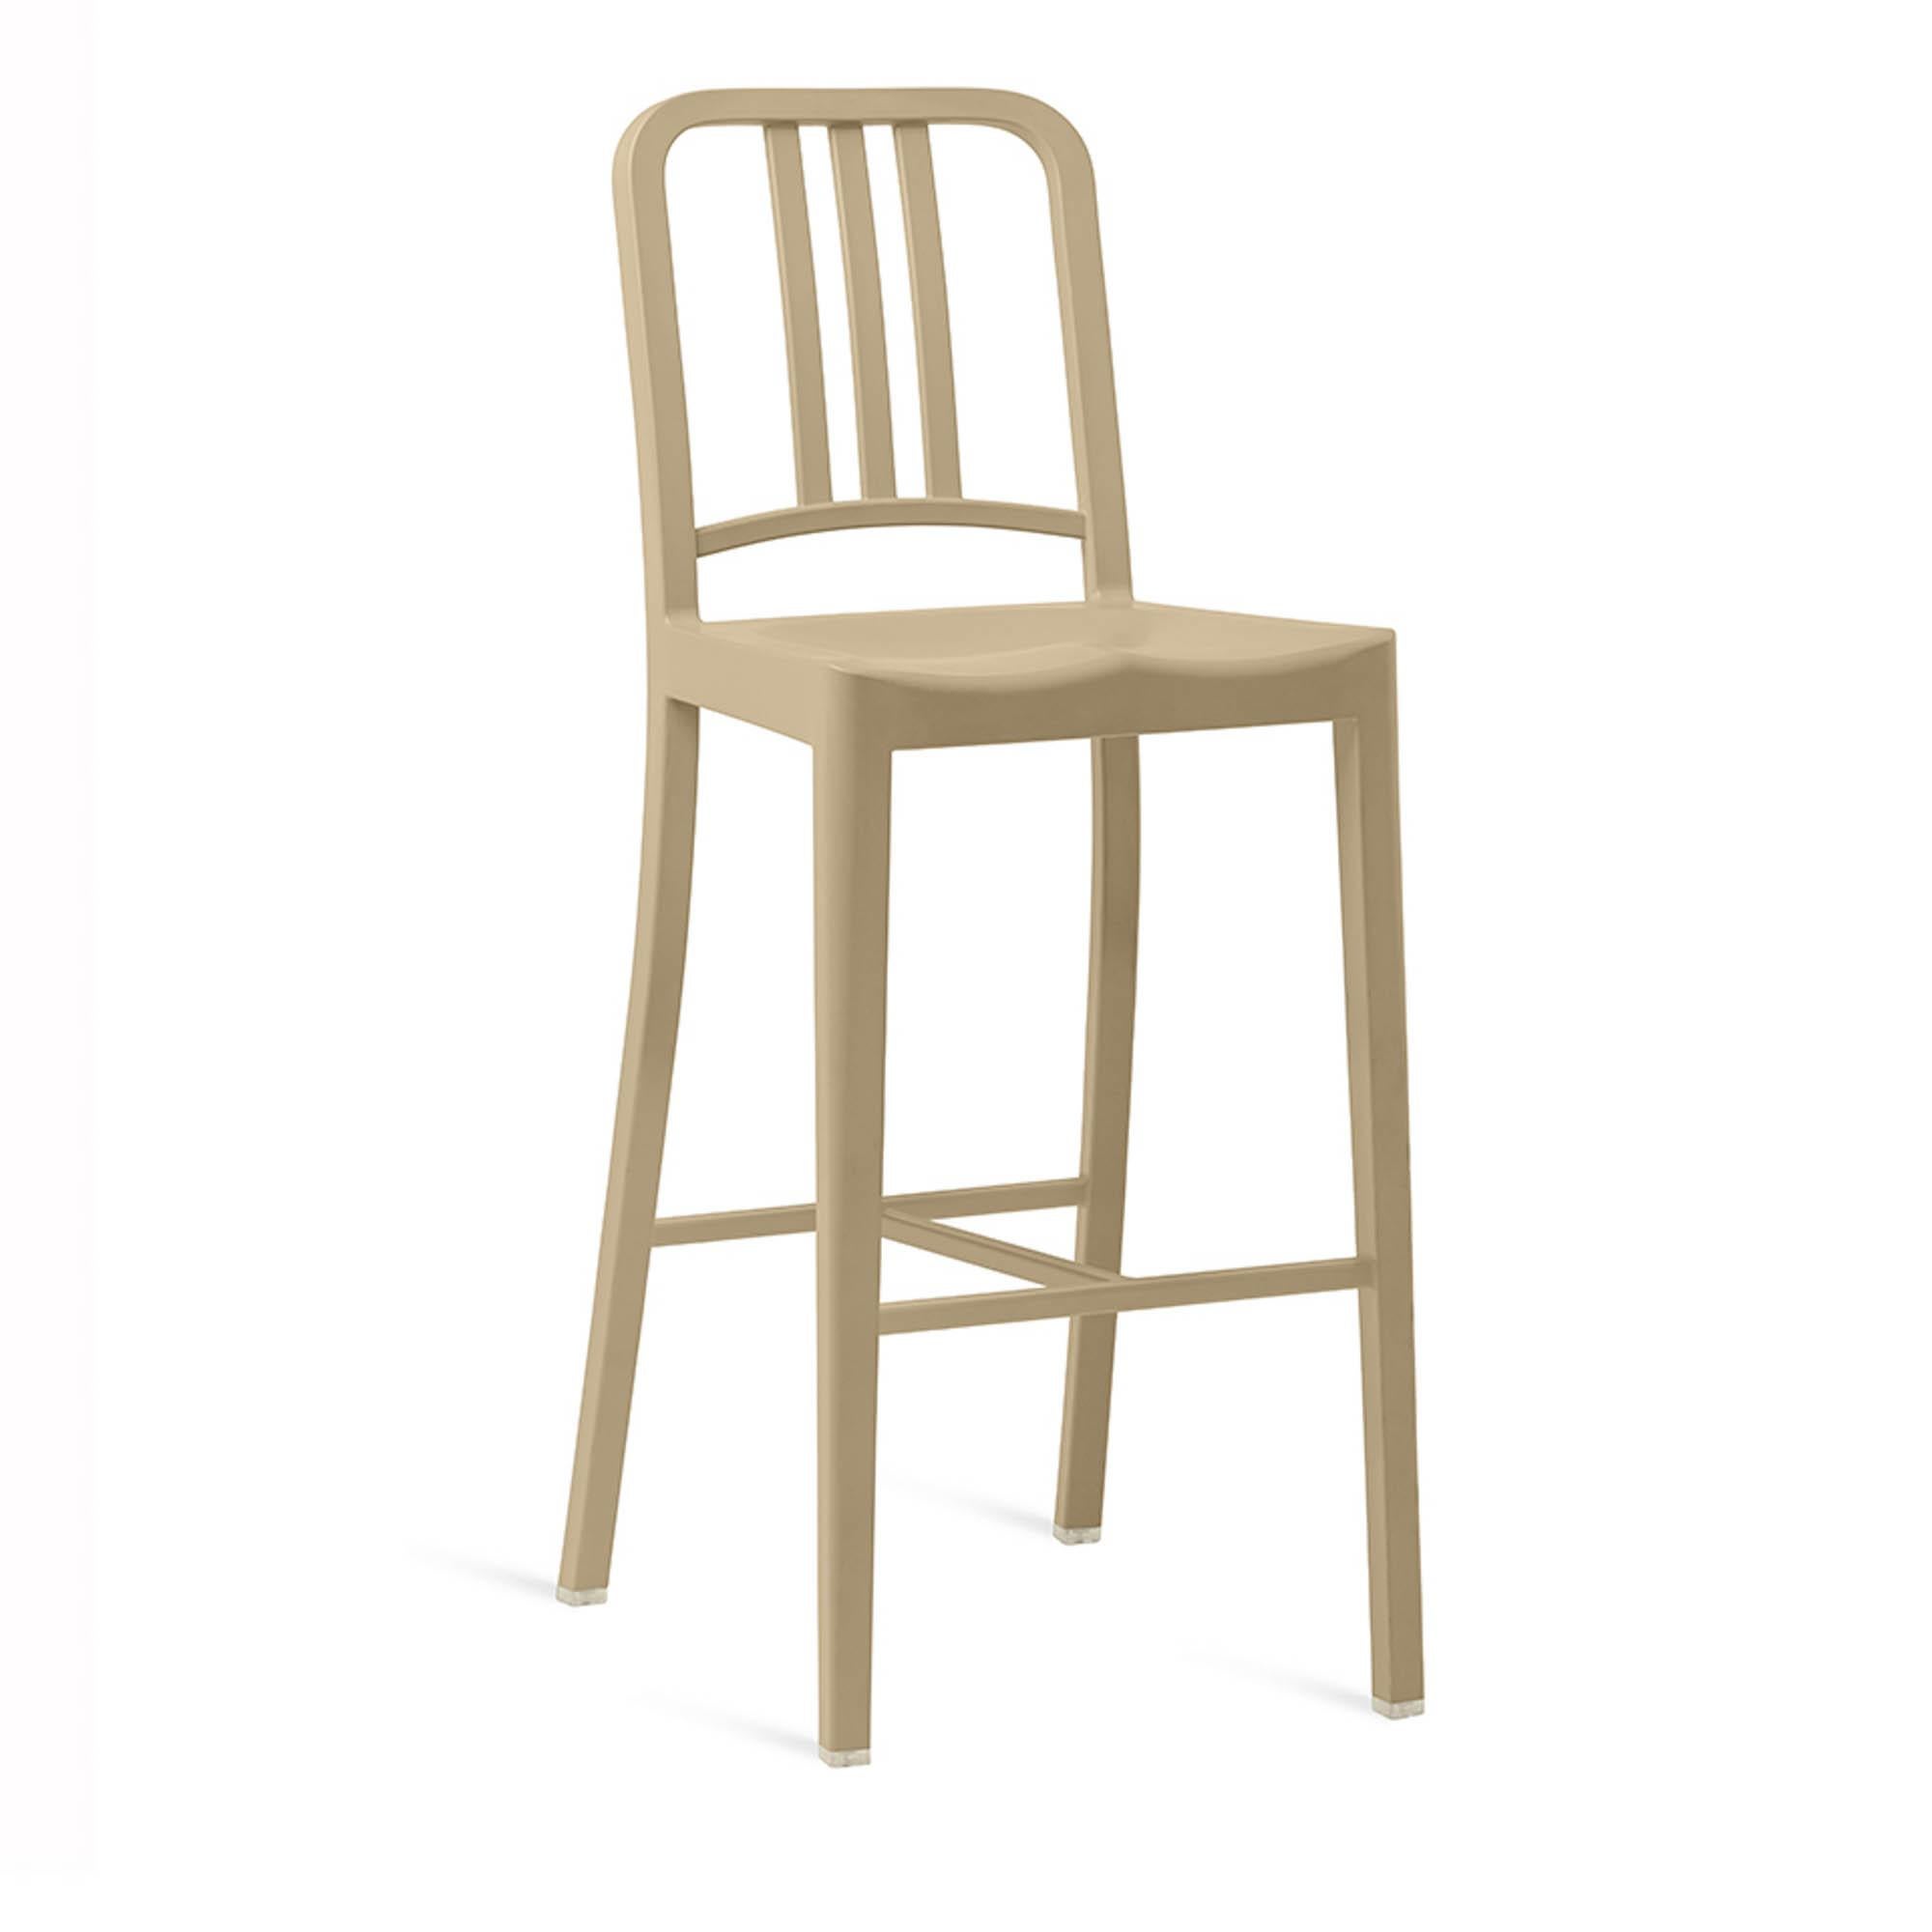 The 111 Navy Collection is a story of innovation, turning waste plastic into something that lasts. Each stool is made of 150 recycled PET bottles. Like the original 111 Navy chair, these one-piece stools are an engineering success - made to stand up